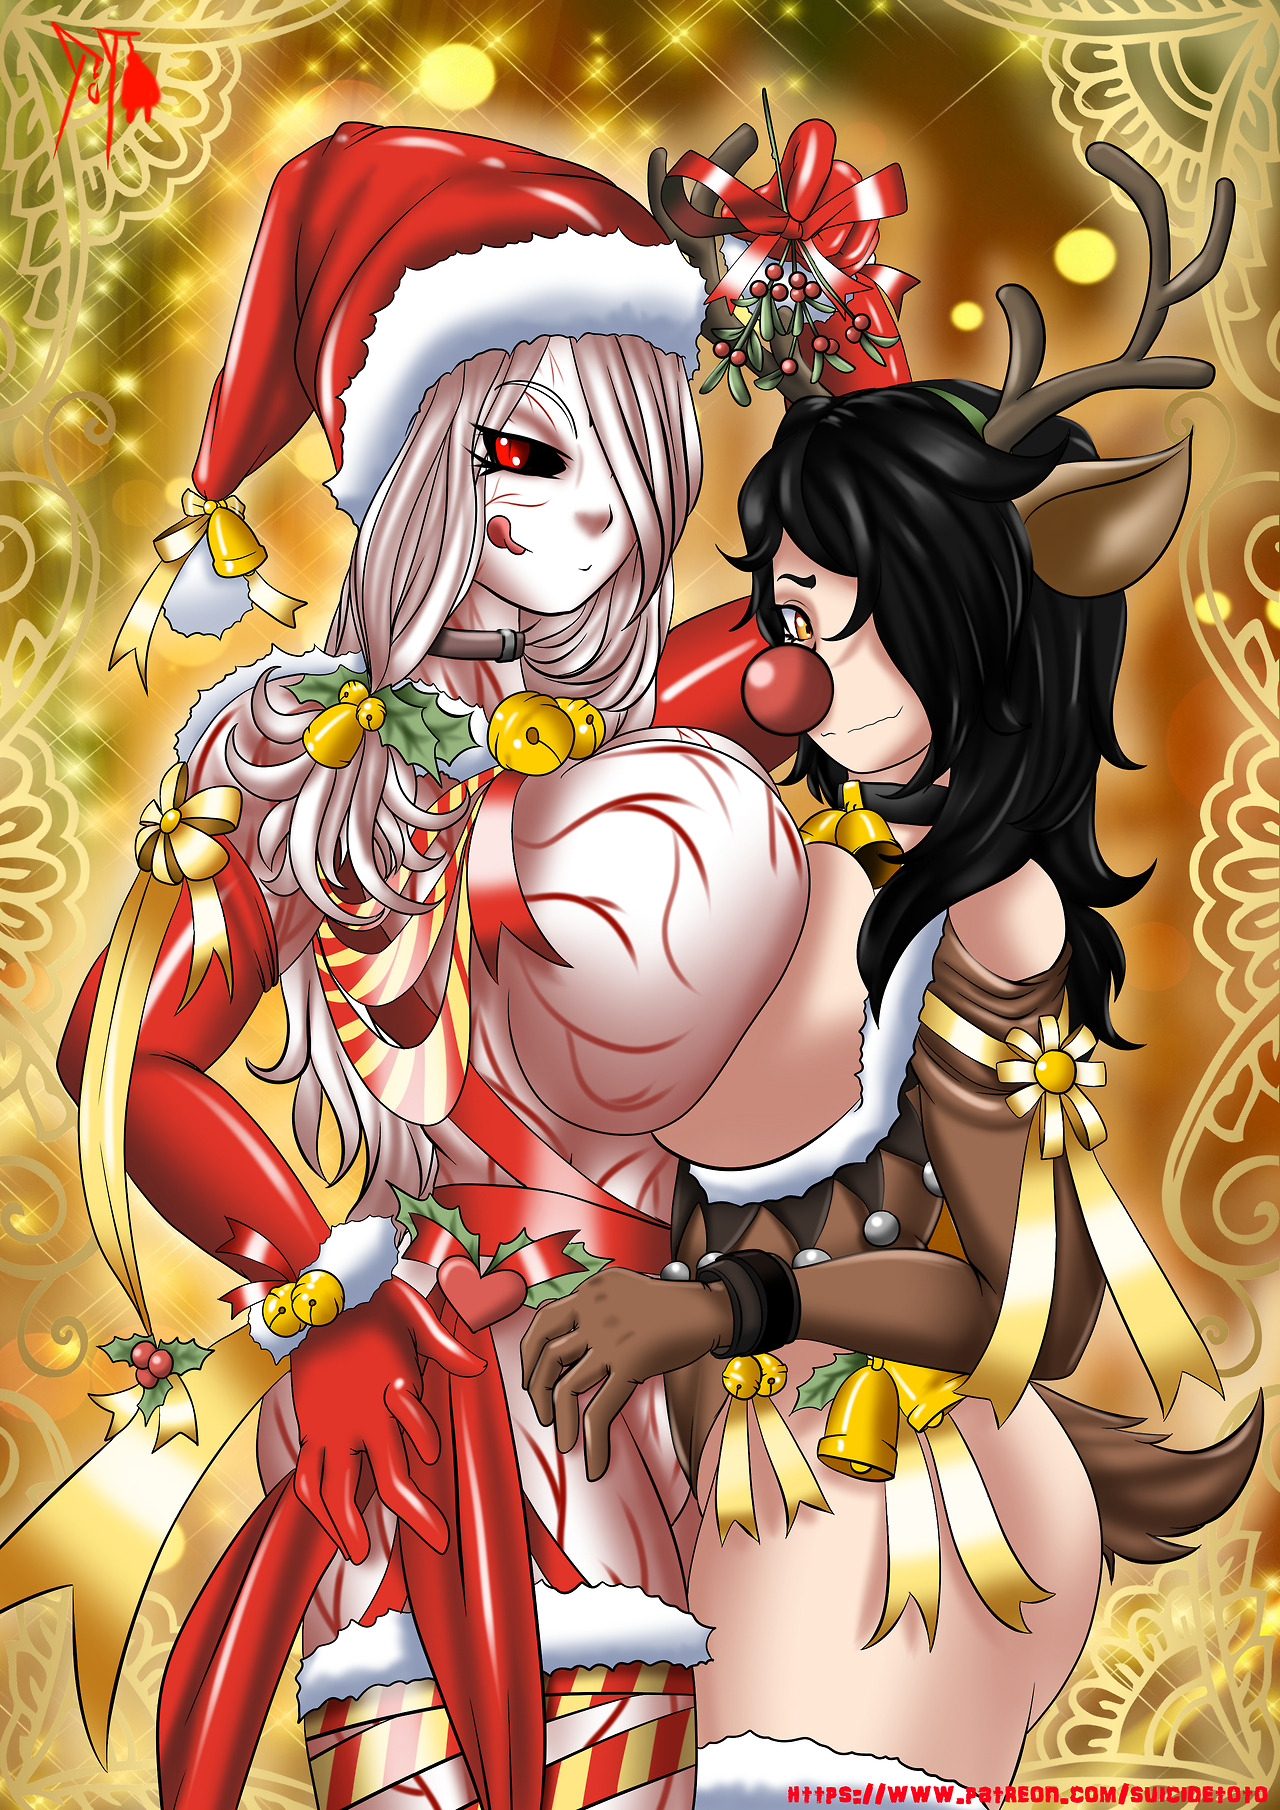 christmas special 2017 4 : salem and cindermerry christmas everyone :)heres my patreon